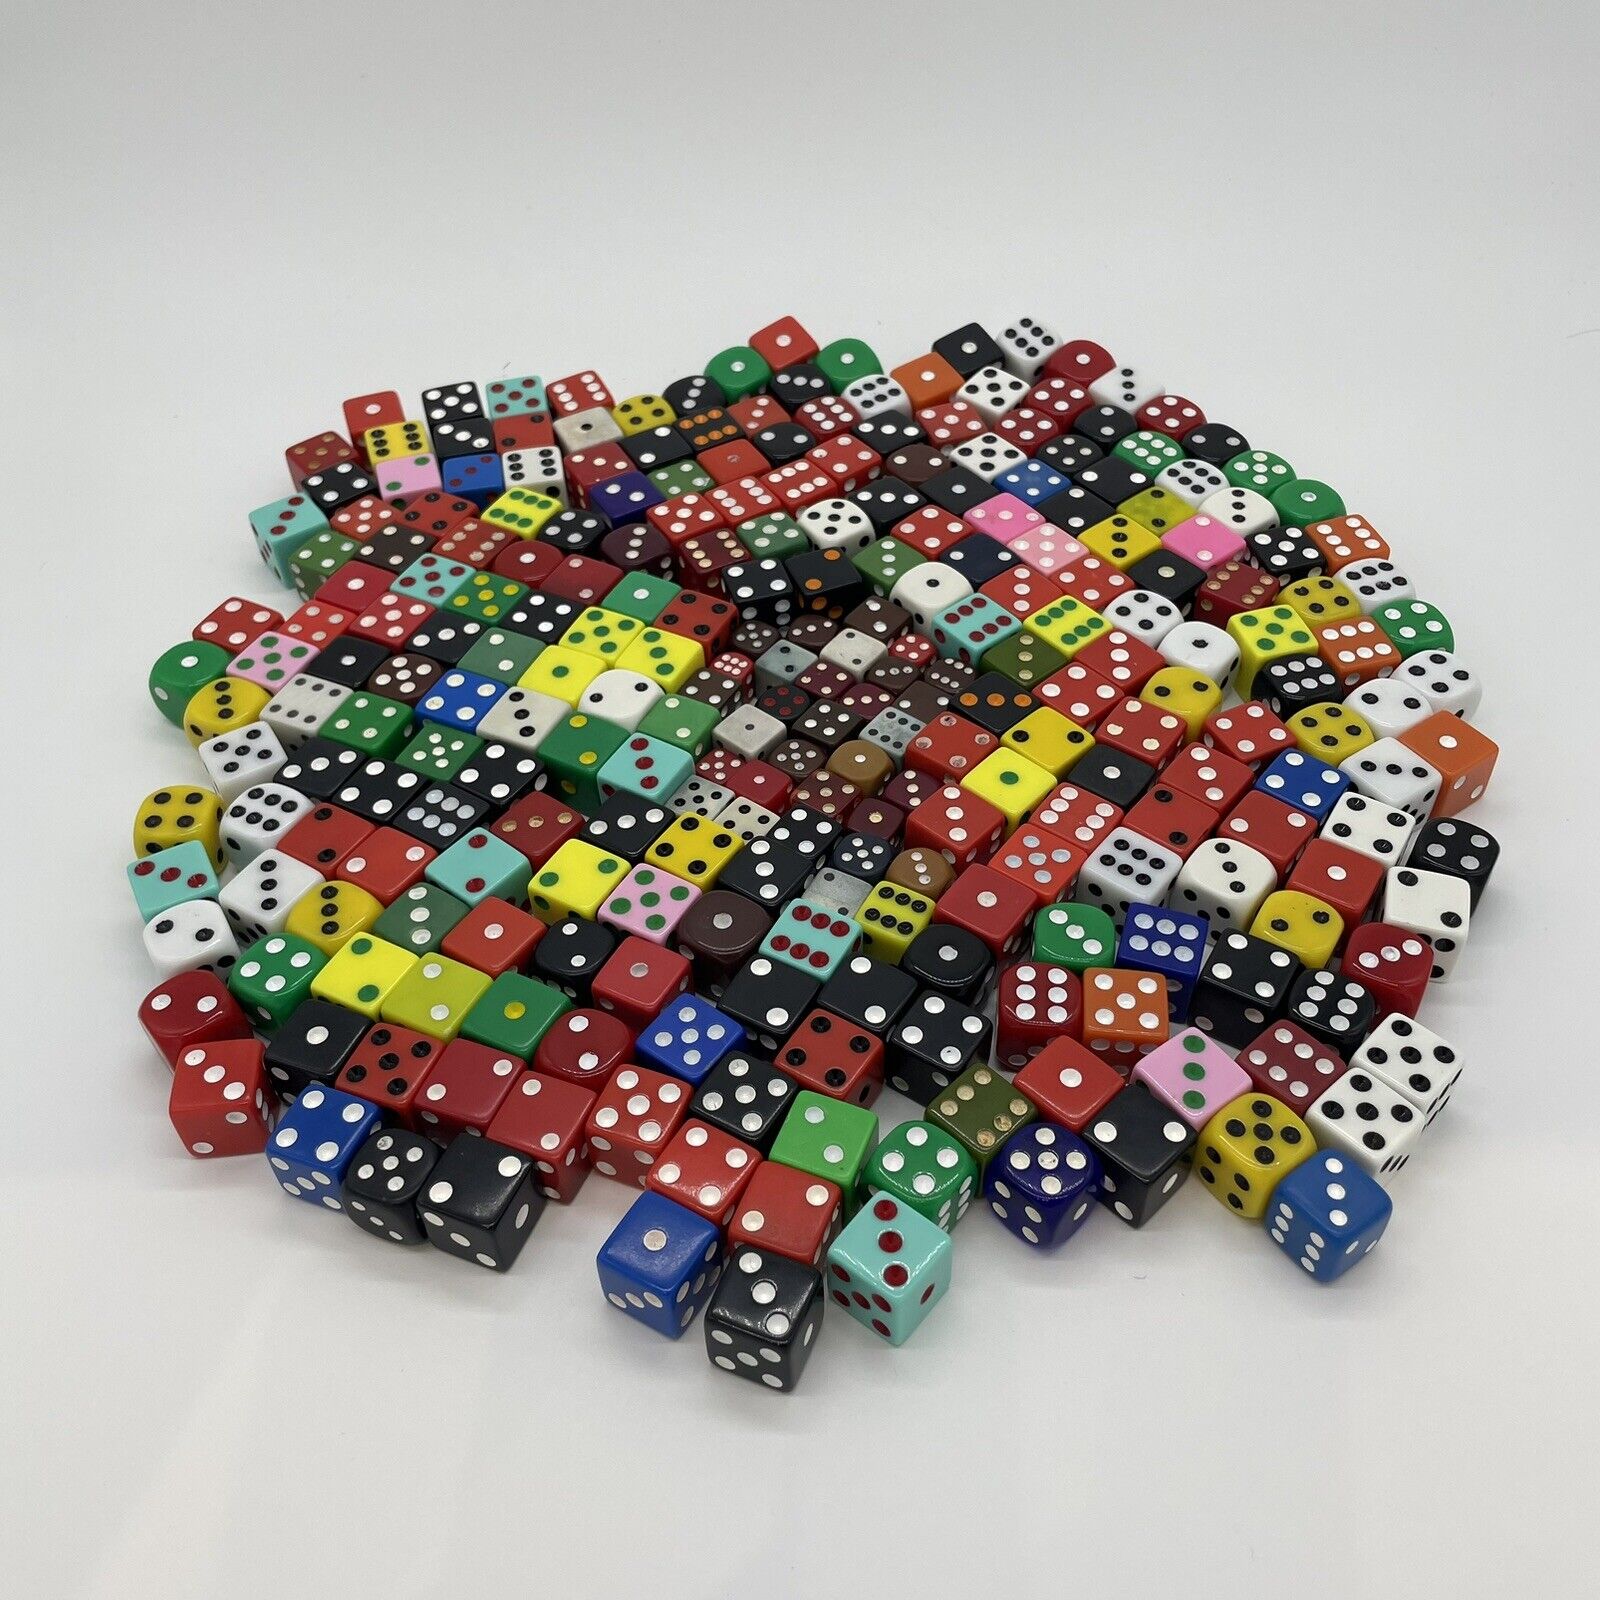 Large Lot of 250+ Dice - Various Colors and Sizes Some Vintage - Over 2 Pounds